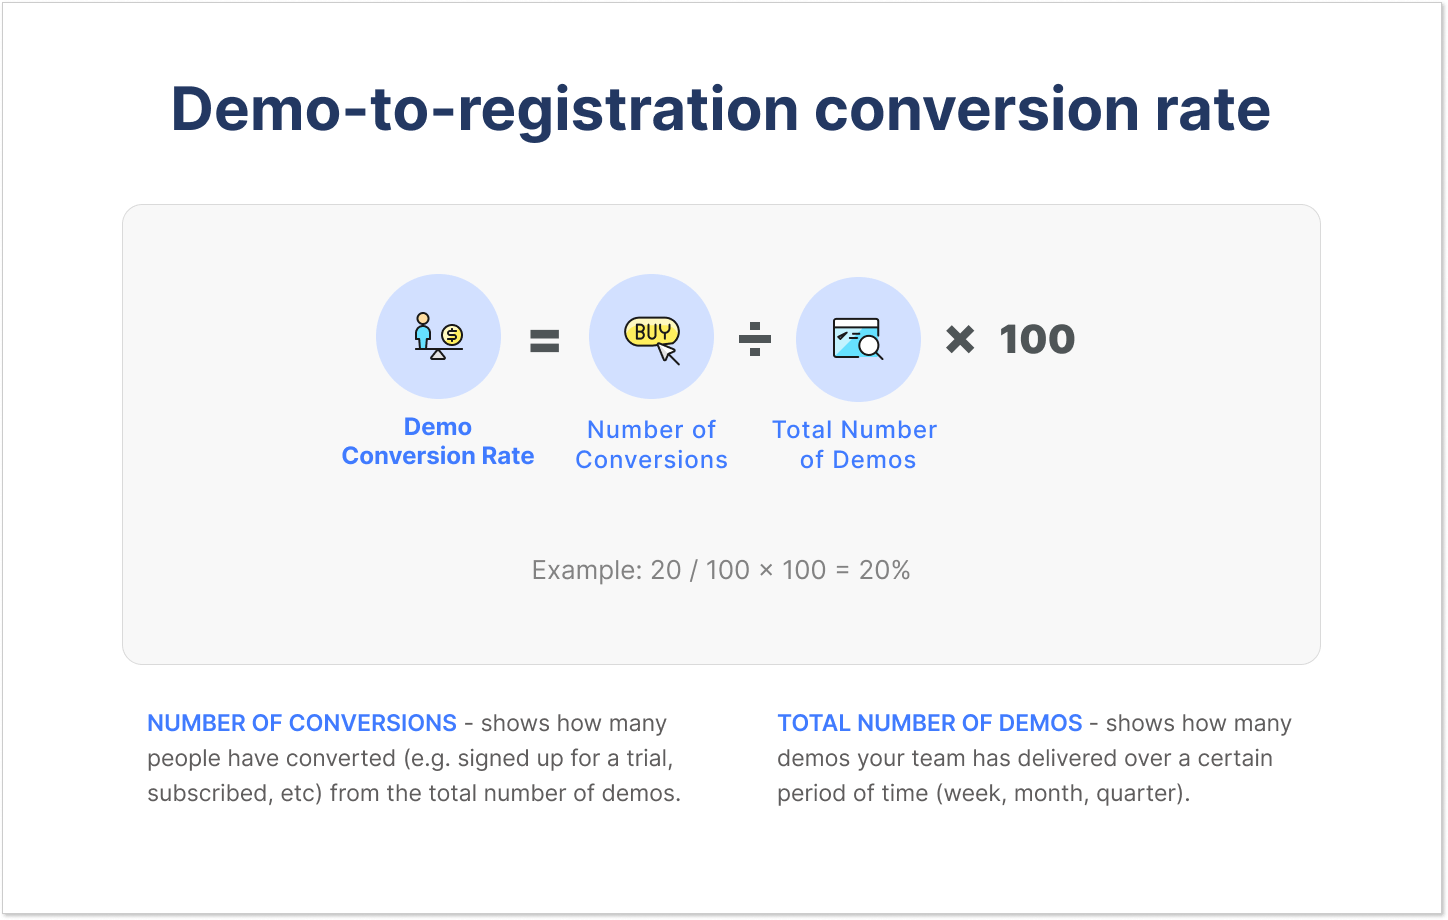 Demo-to-registration conversion rate